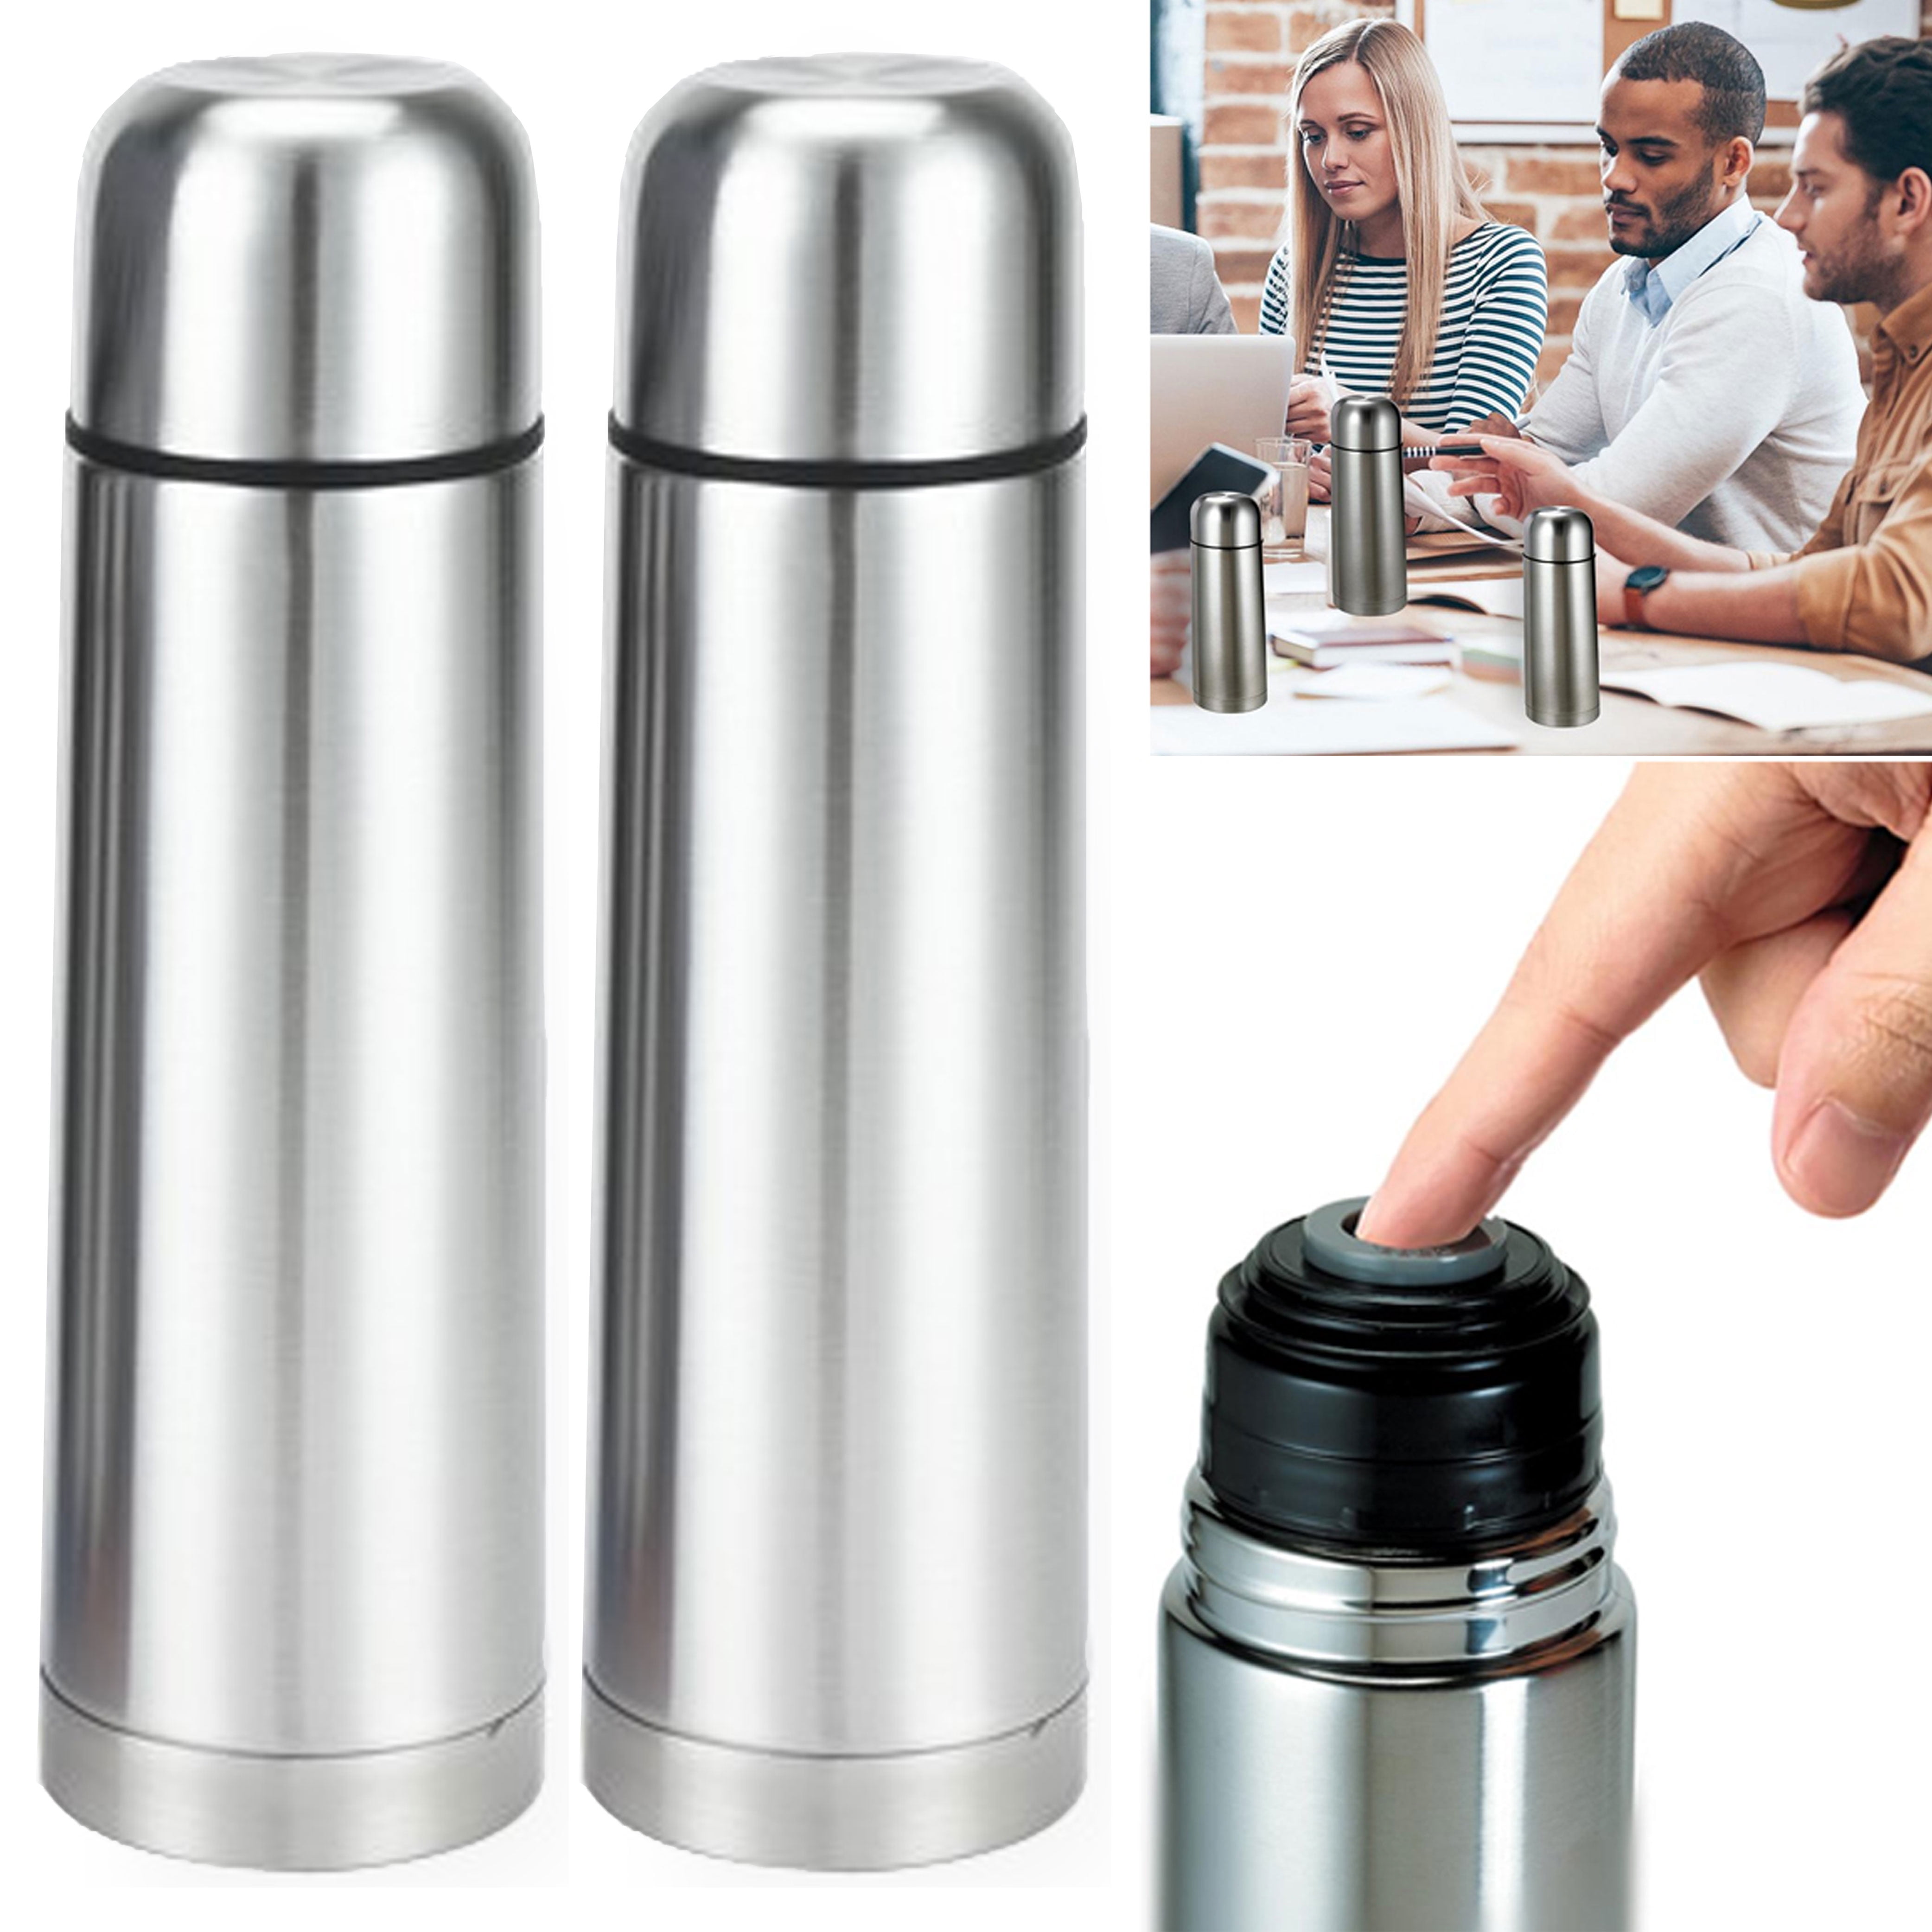 Stainless Steel Thermos Flask Insulated Vacuum Jug Tea Coffee Hot Drink 1L  / 2L